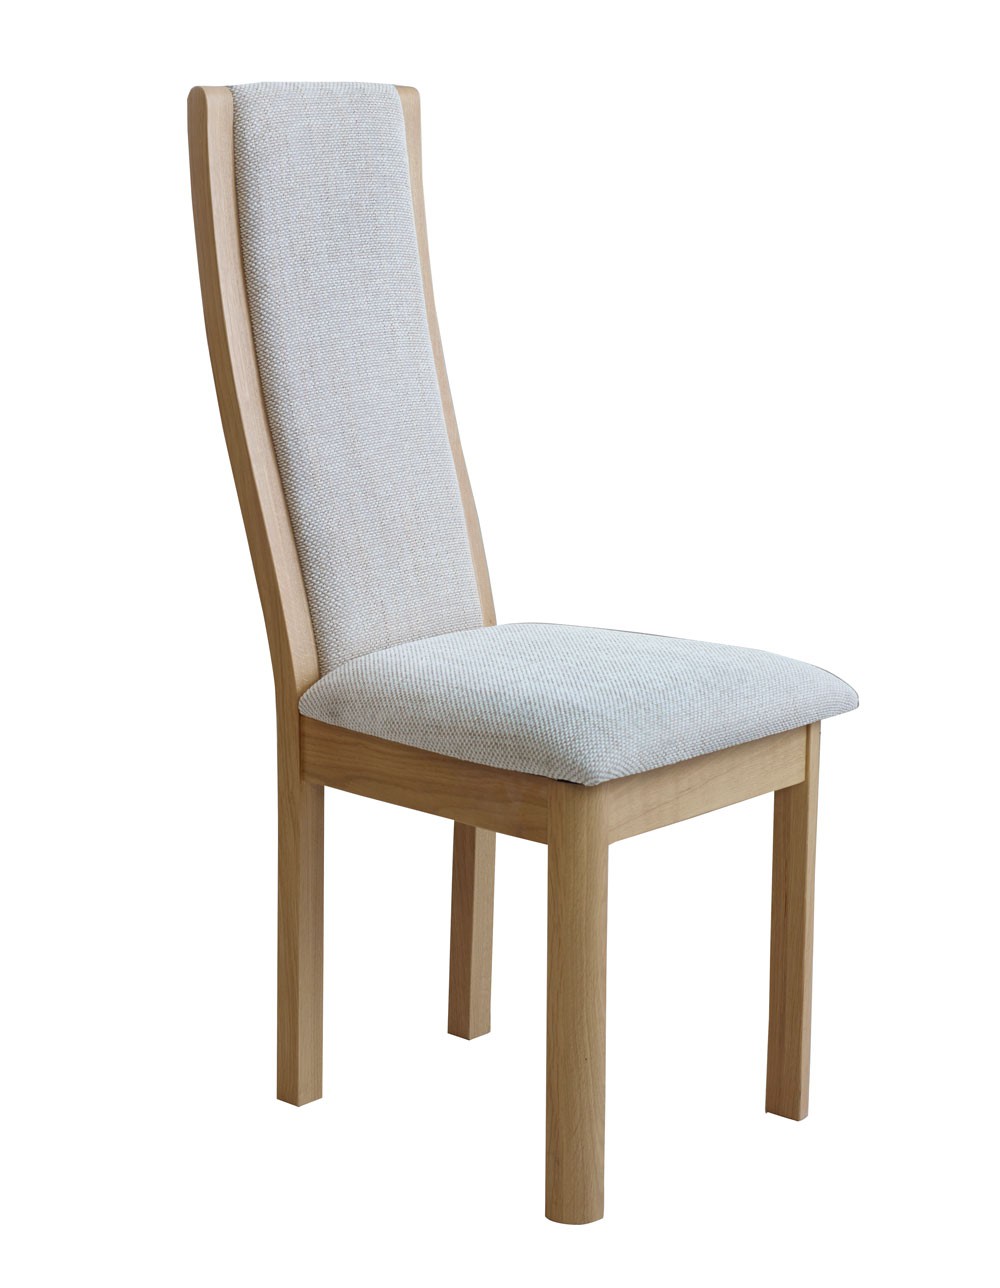 Stockholm High Back Chair Natural Fabric